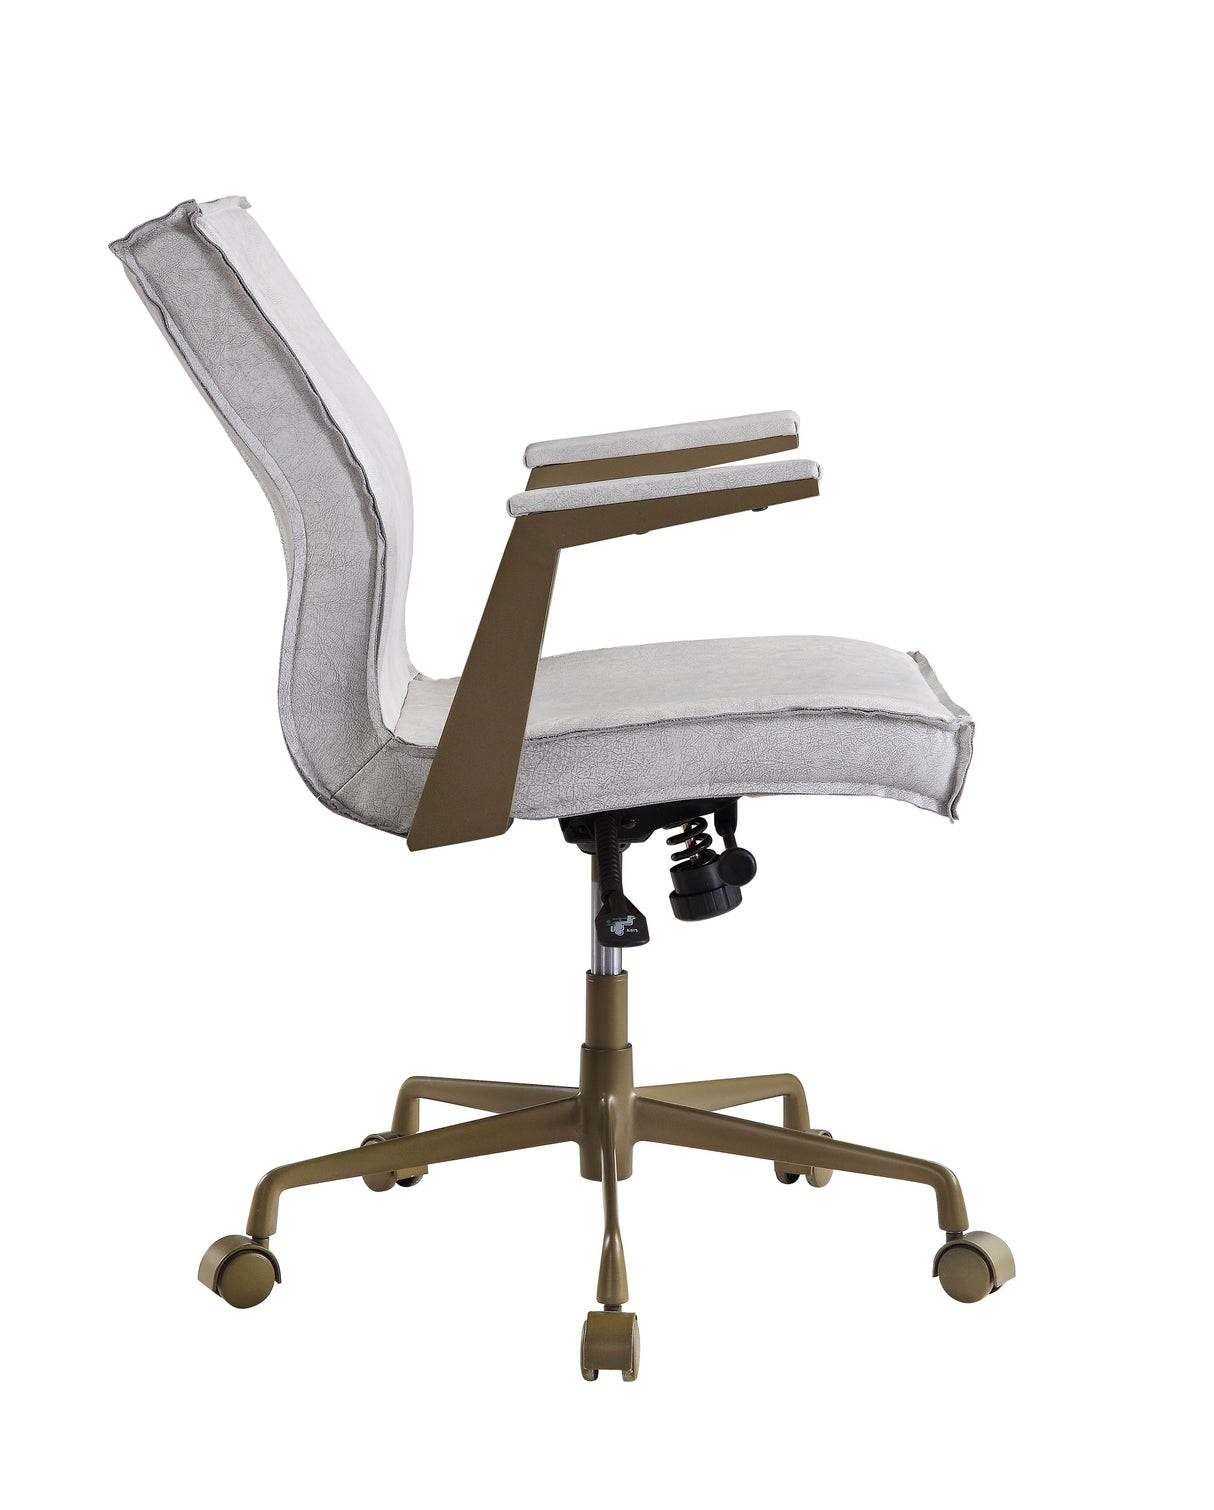 Attica Vintage White Top Grain Leather Executive Office Chair